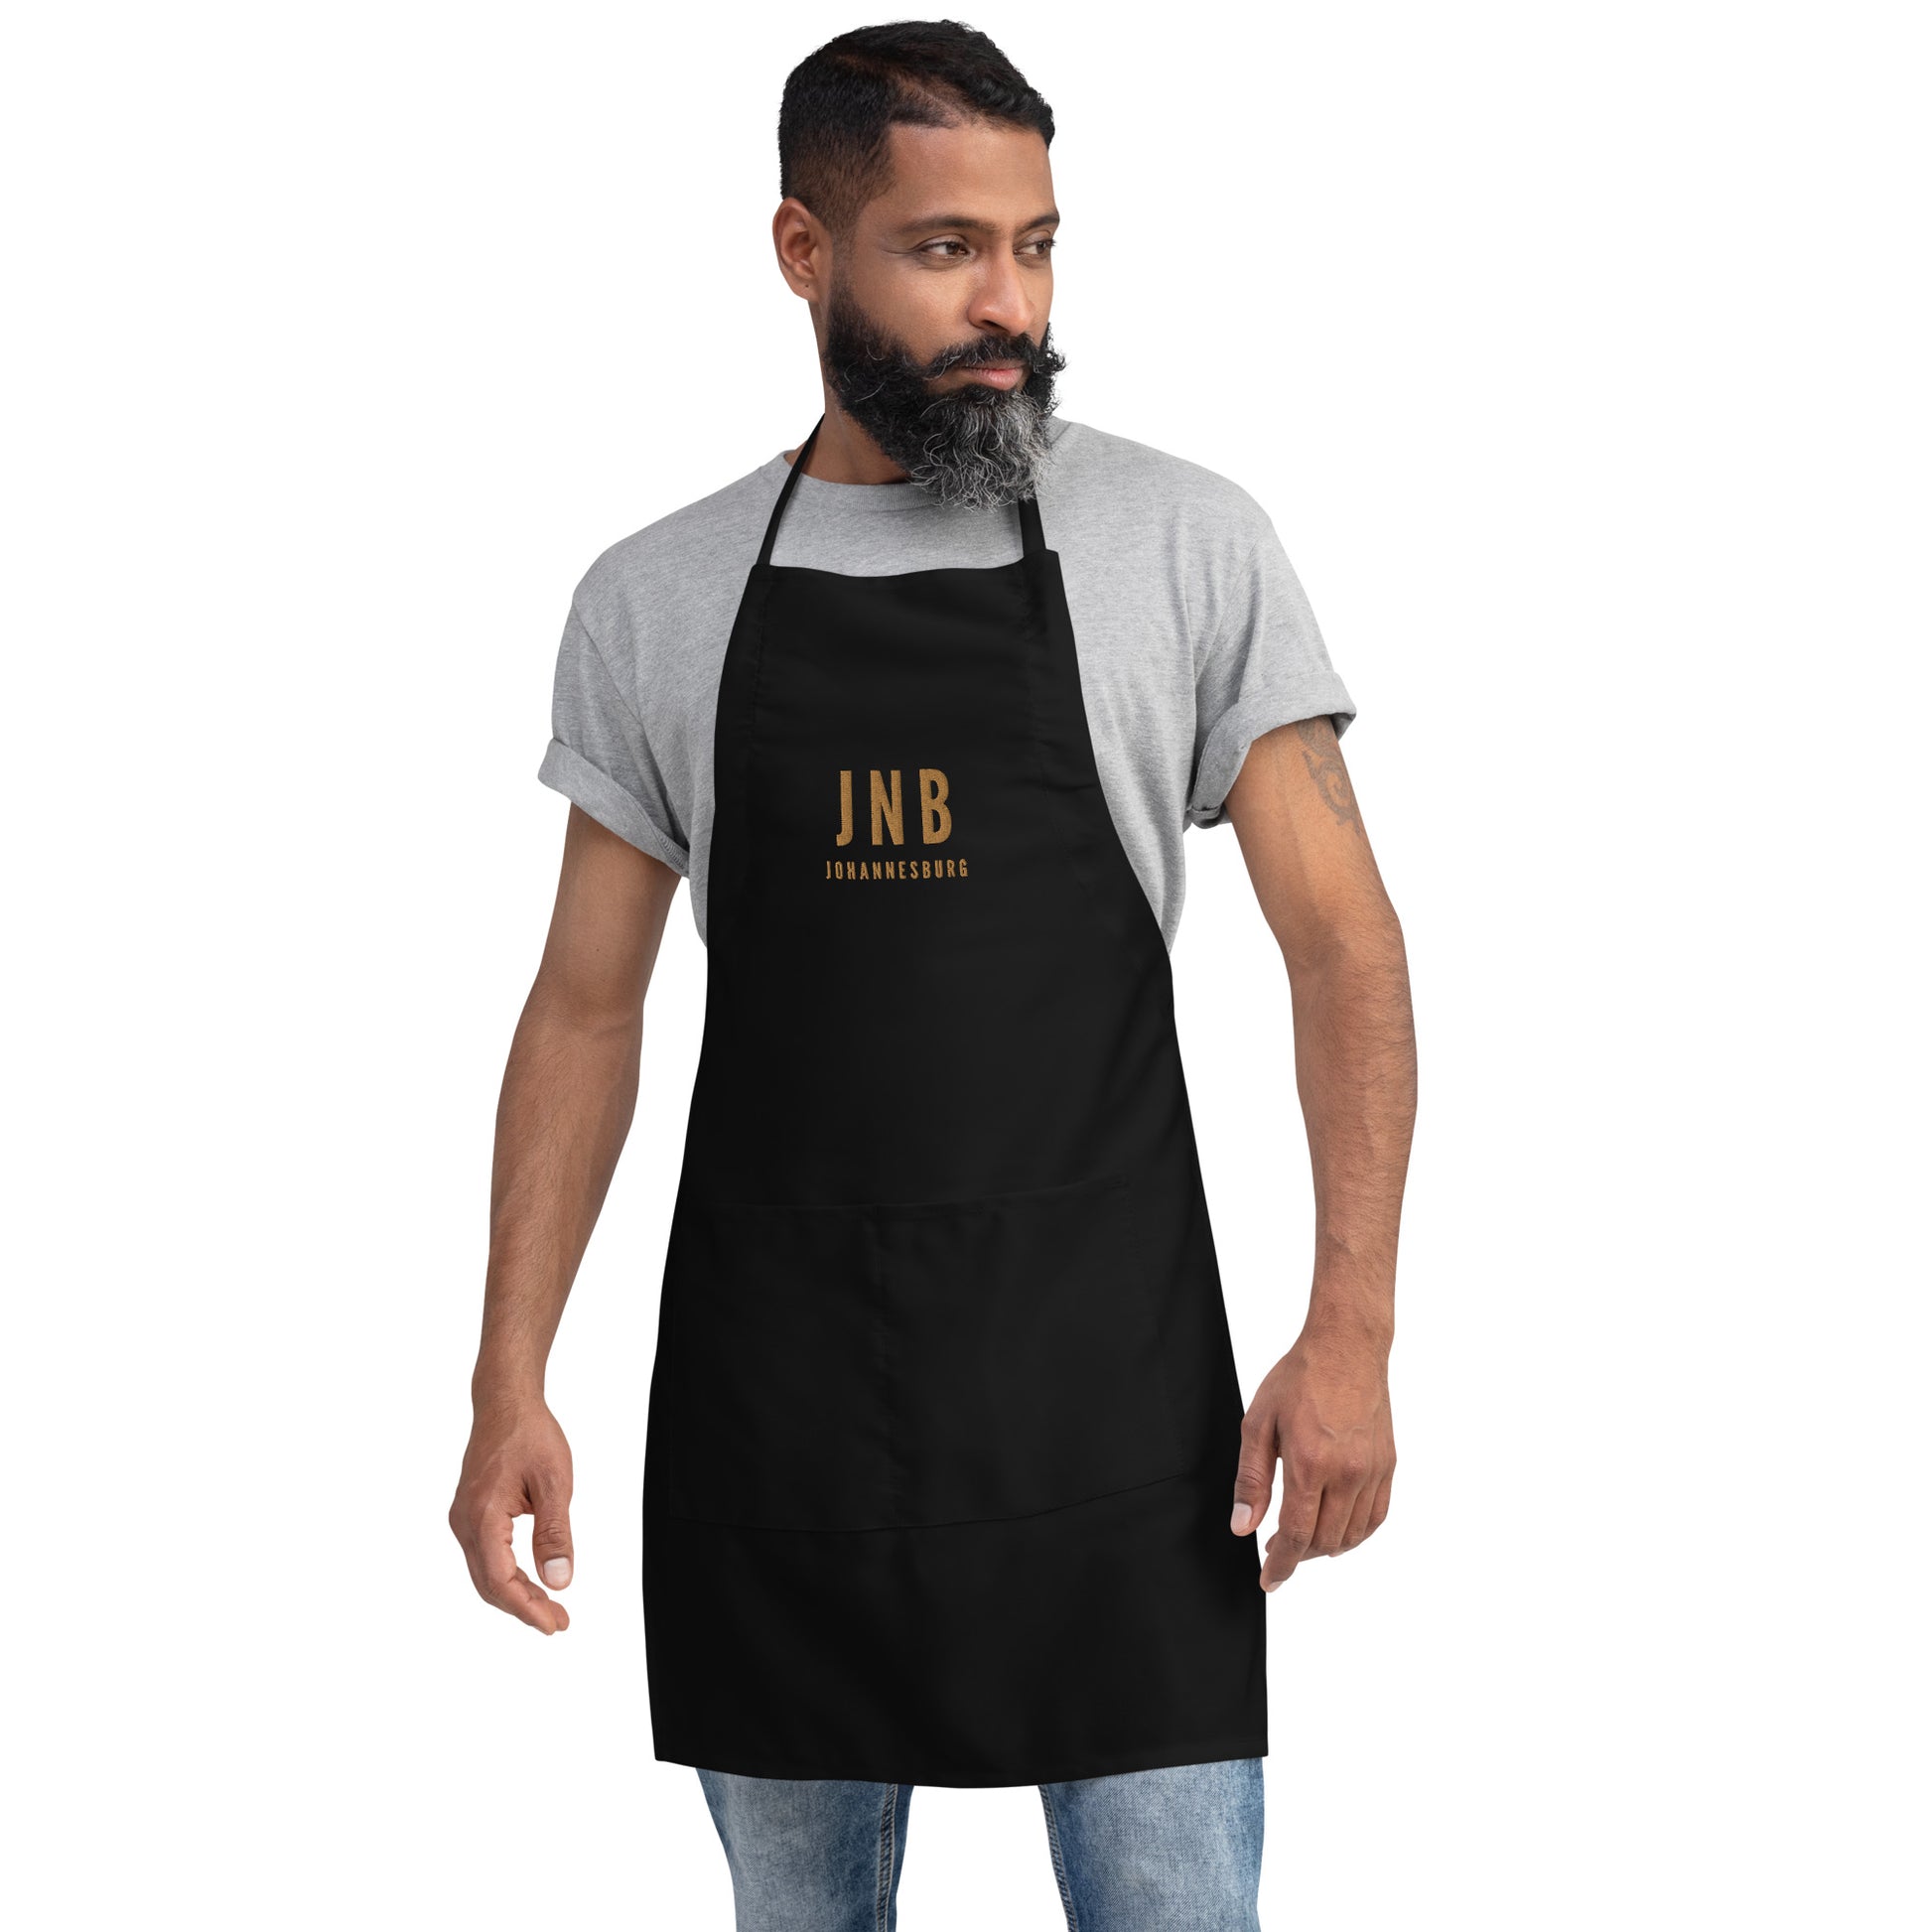 City Embroidered Apron - Old Gold • JNB Johannesburg • YHM Designs - Image 05